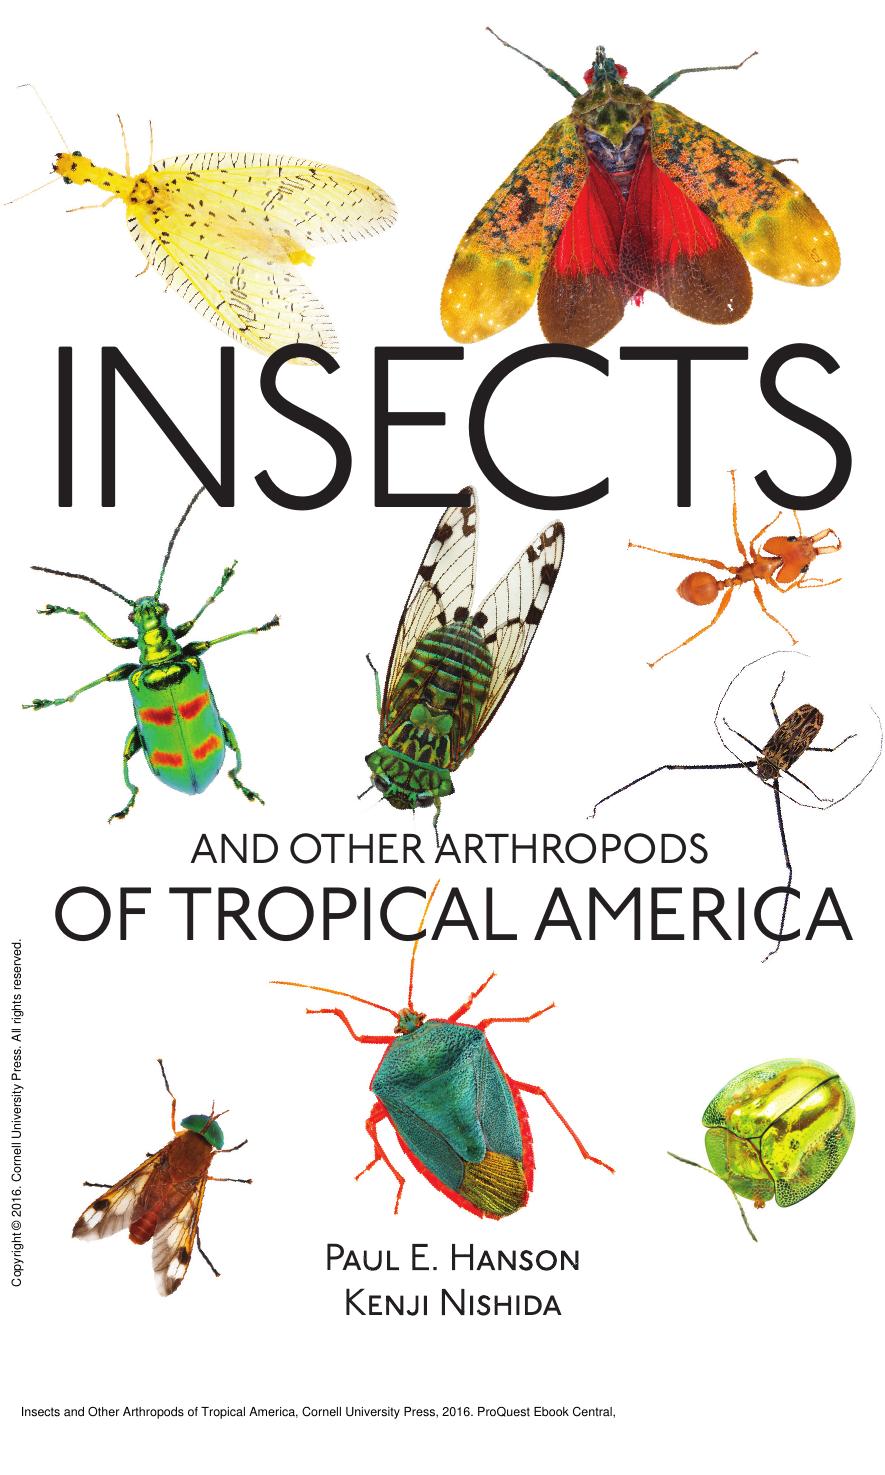 Insects and Other Arthropods of Tropical America by Paul Hanson; Kenji Nishida